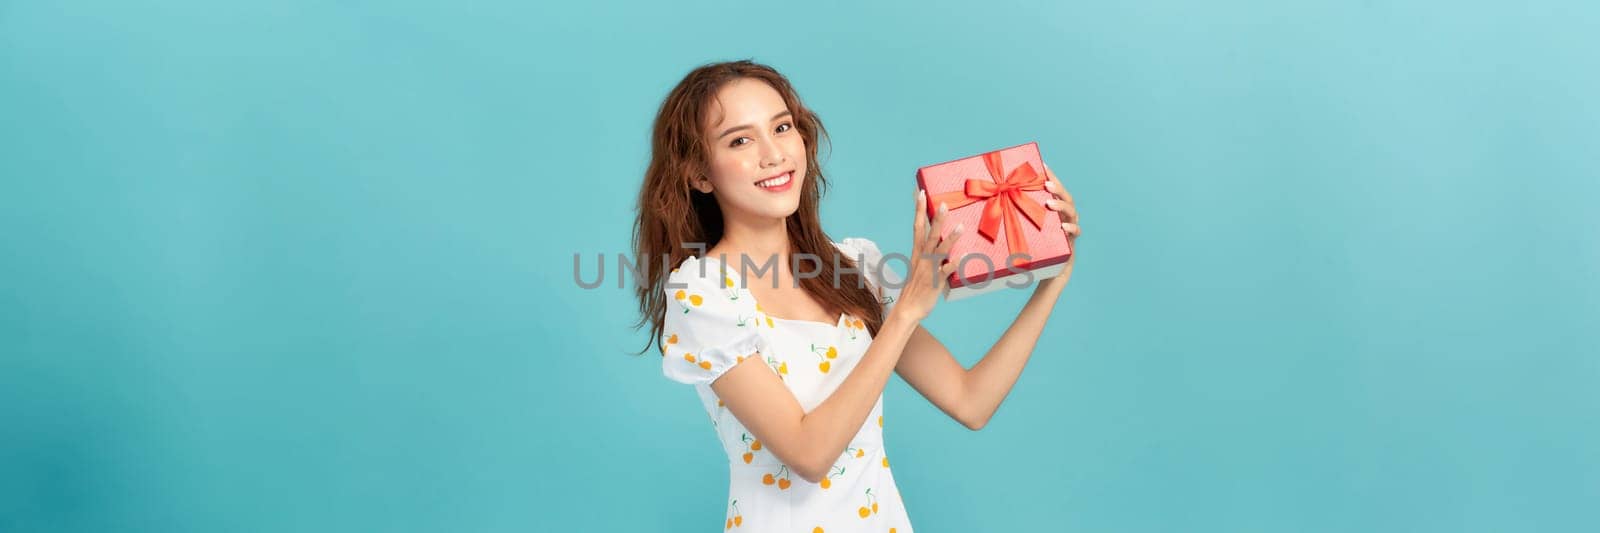 Portrait of happy charismatic girl shaking gift box wondering whats inside as celebrating birthday by makidotvn